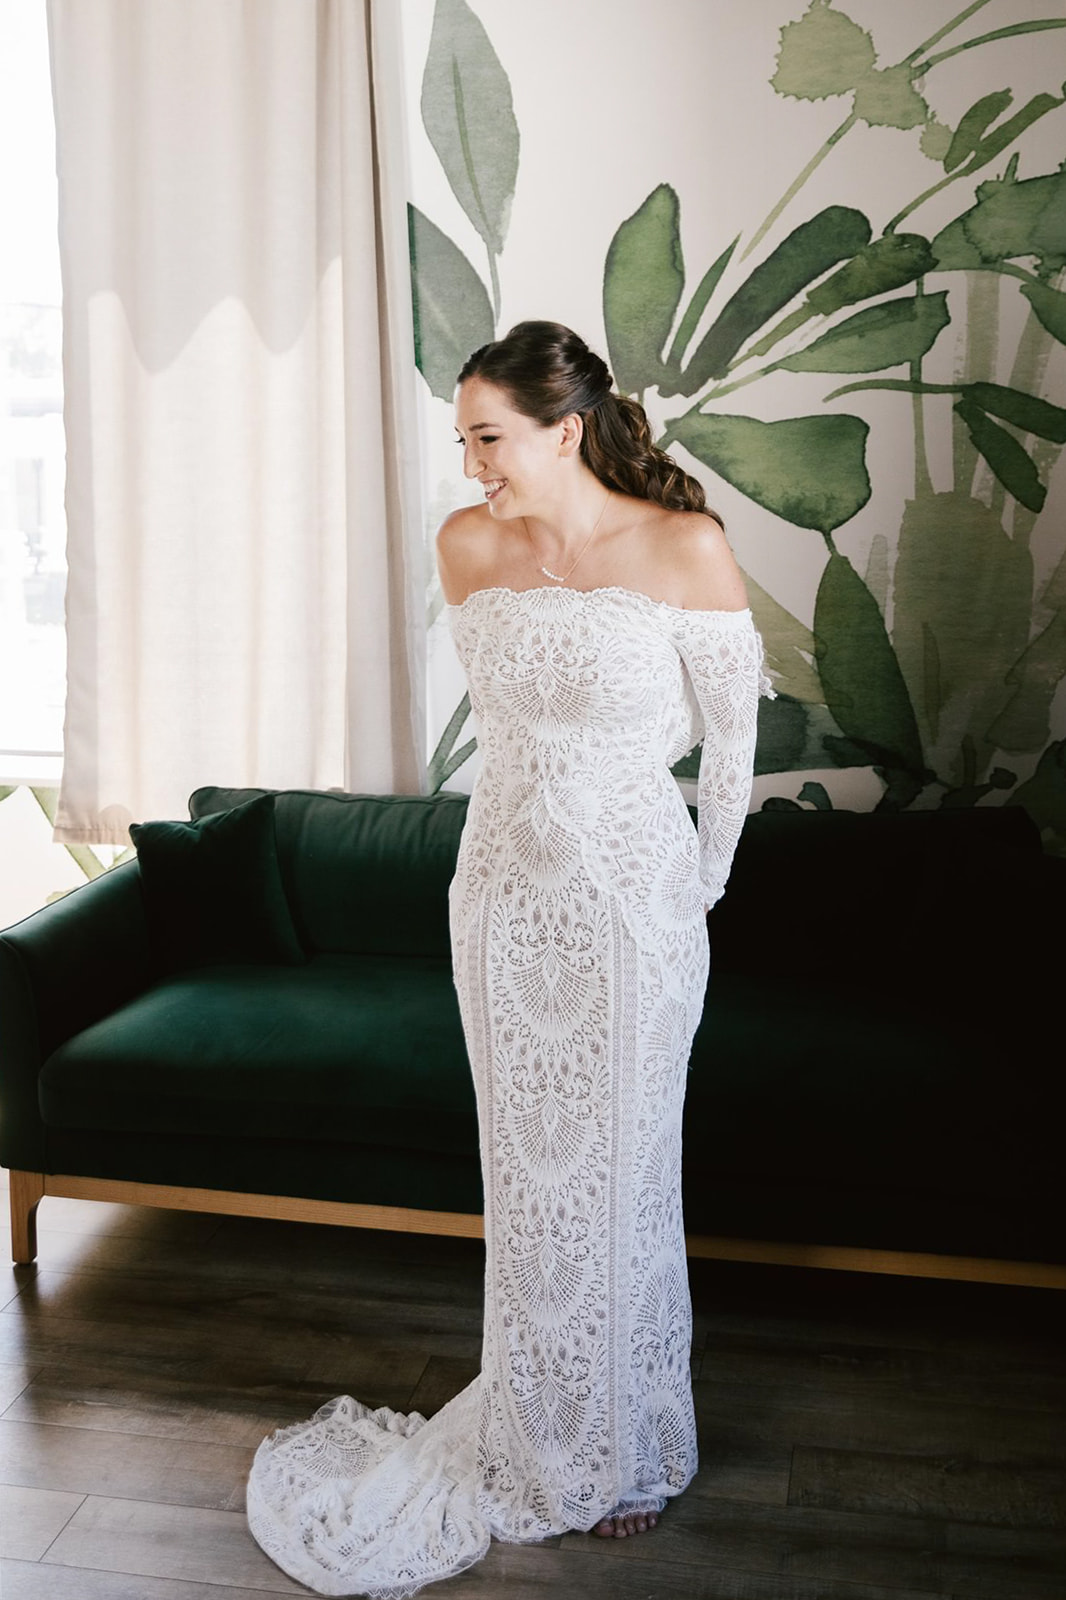 Bride's preparation unfolds in the lush, greenery-adorned room at Walden Chicago, capturing moments of anticipation. 